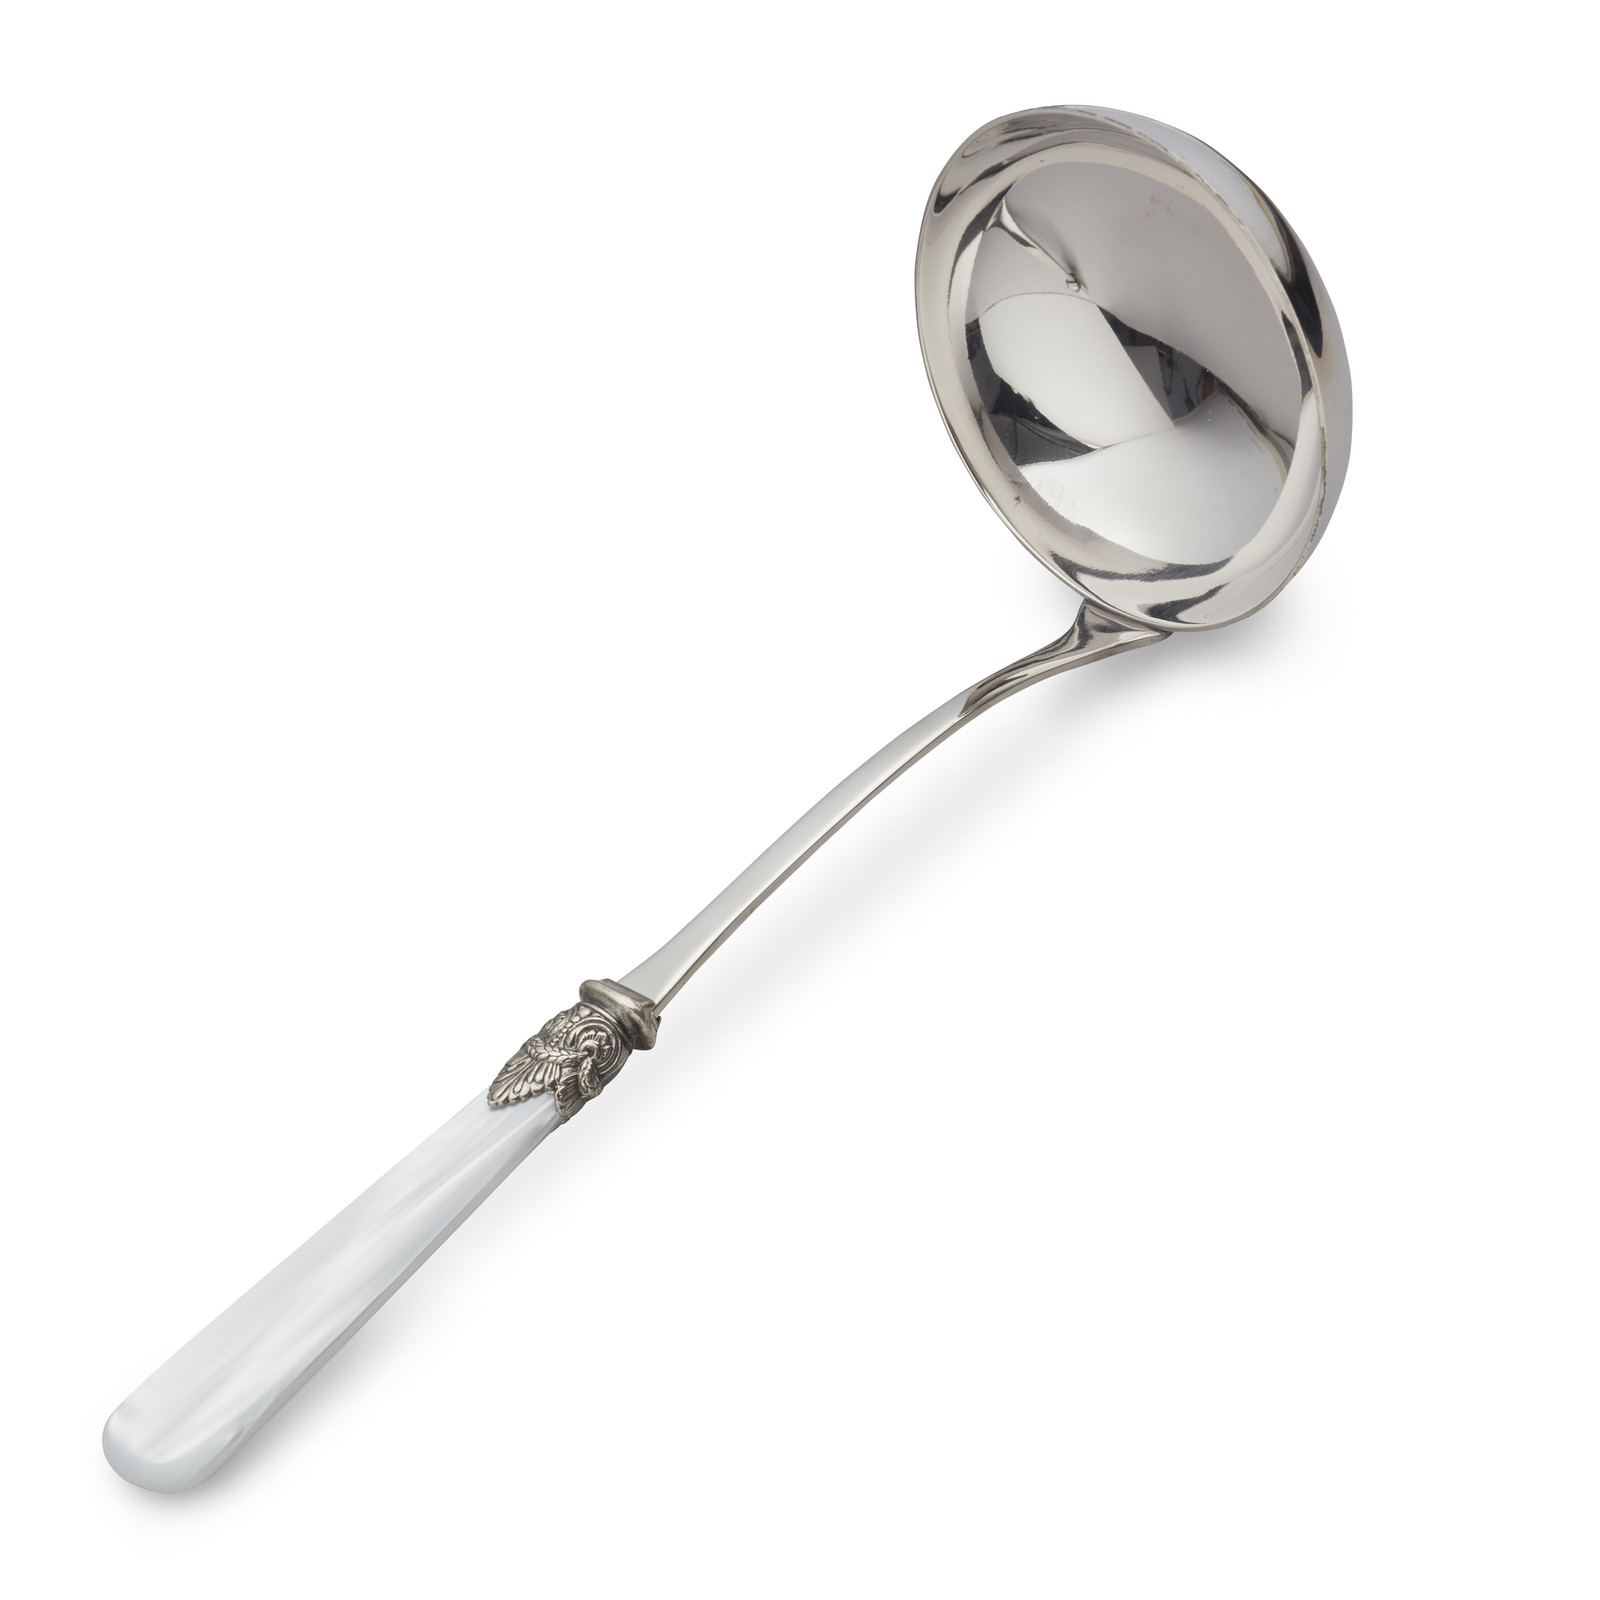 https://cdn.webshopapp.com/shops/295052/files/317139944/1600x1600x2/soup-ladle-white-with-mother-of-pearl.jpg